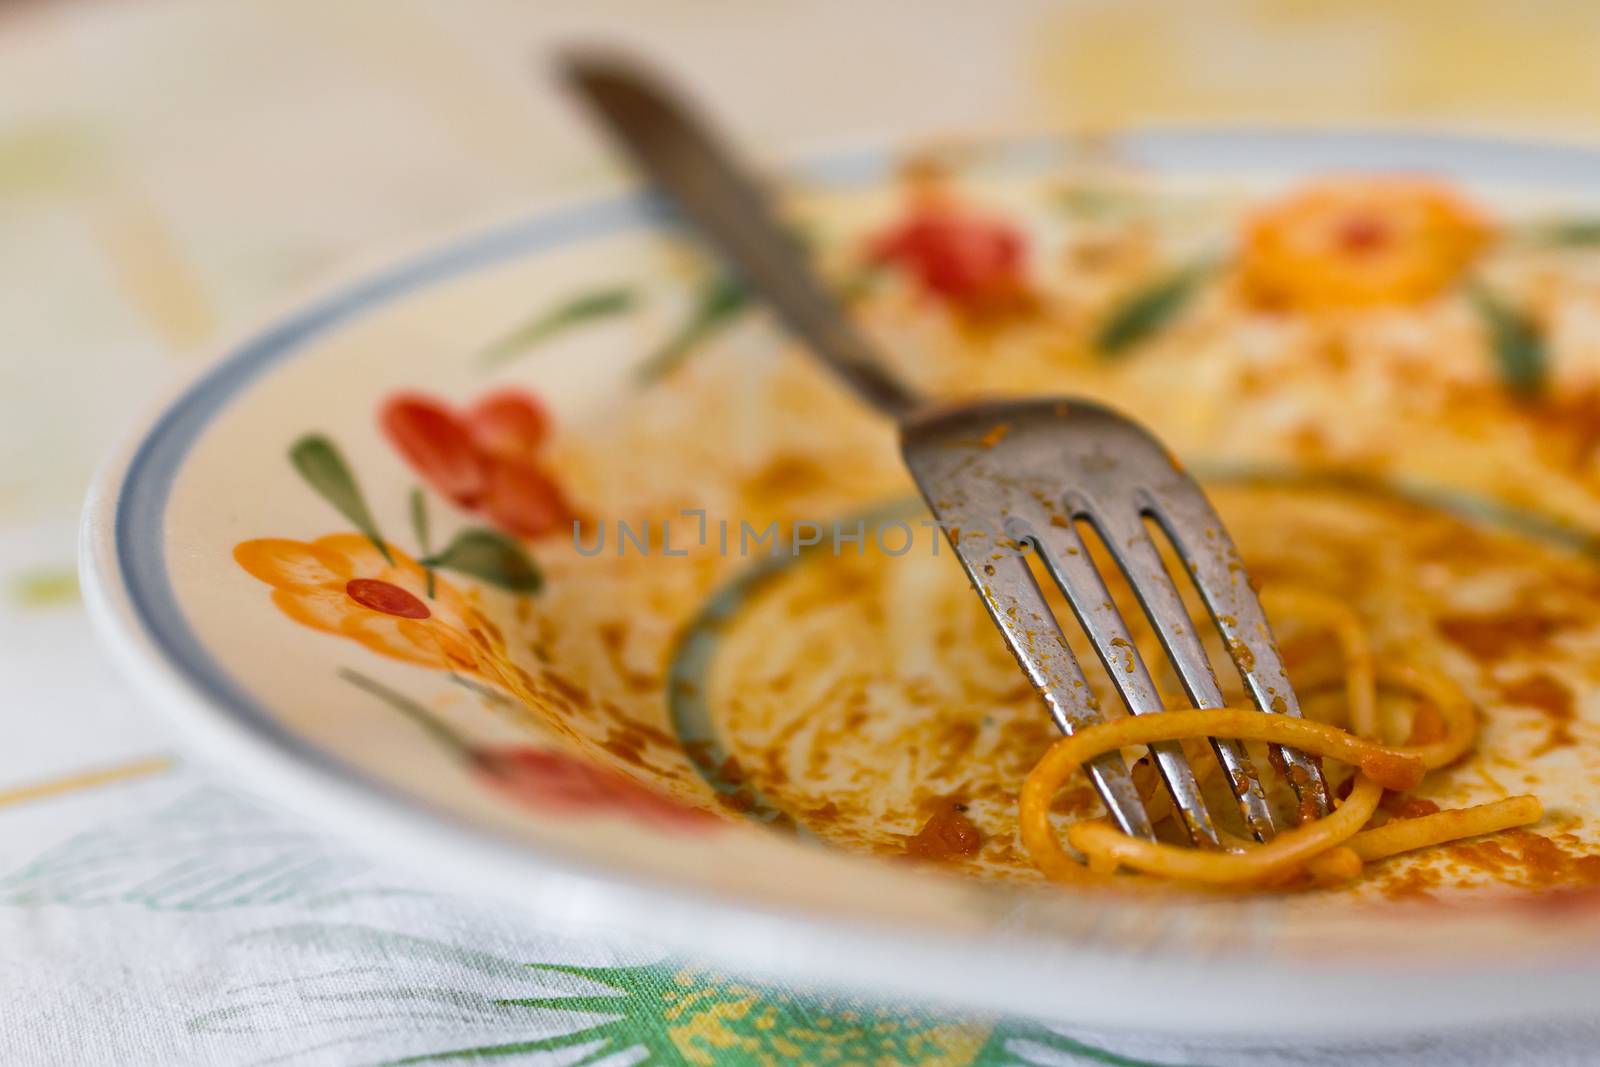 Extreme close-up of a plate of spaghetti eaten.